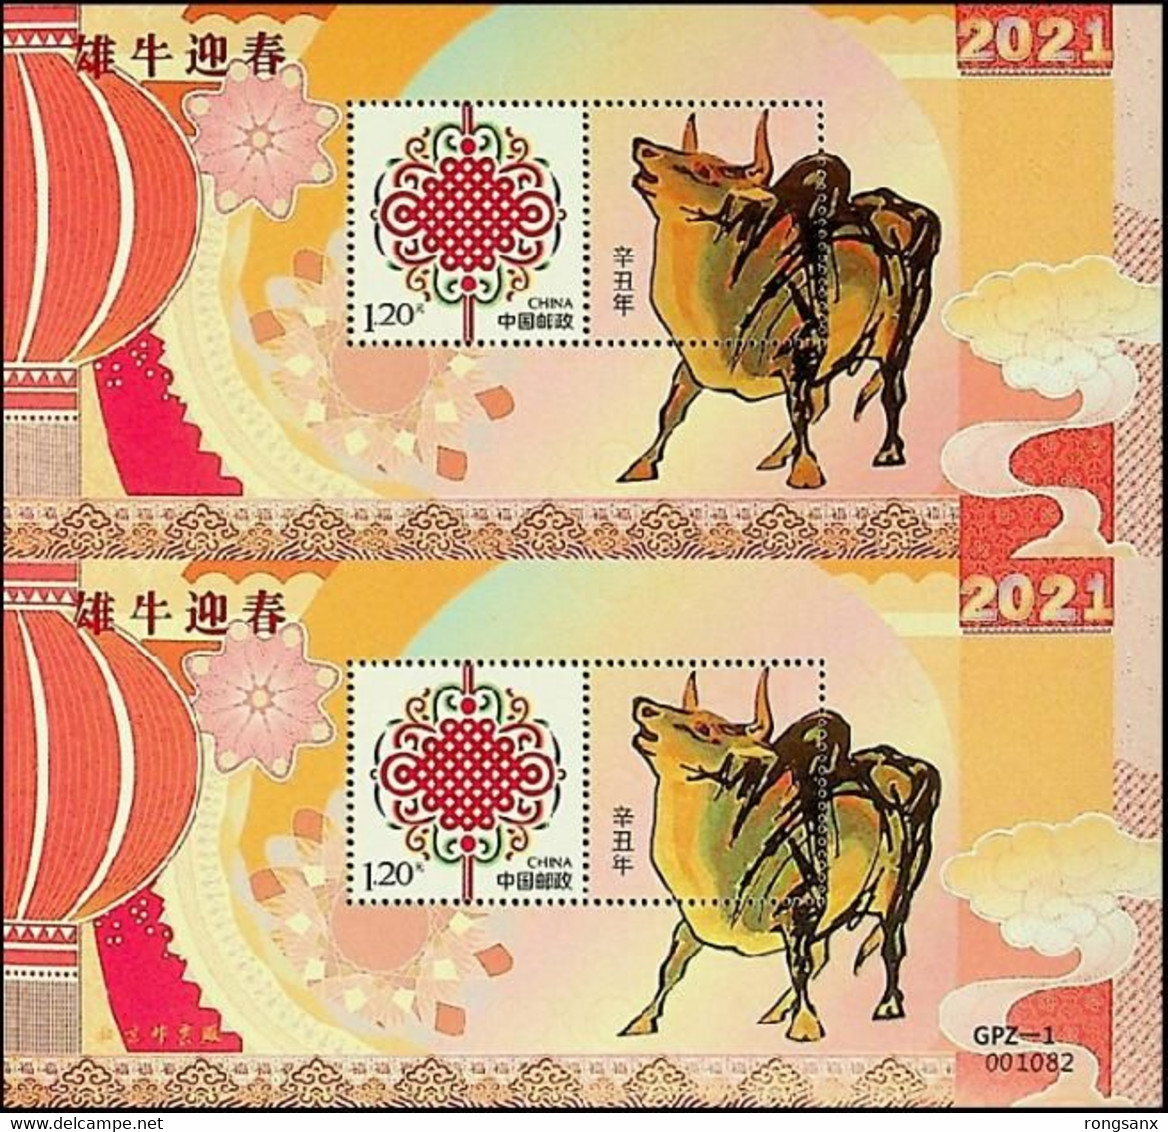 2021 CHINA YEAR OF THE BULL OX GREETING DOUBLE SHEETLET MS GPZ-1 - Chines. Neujahr